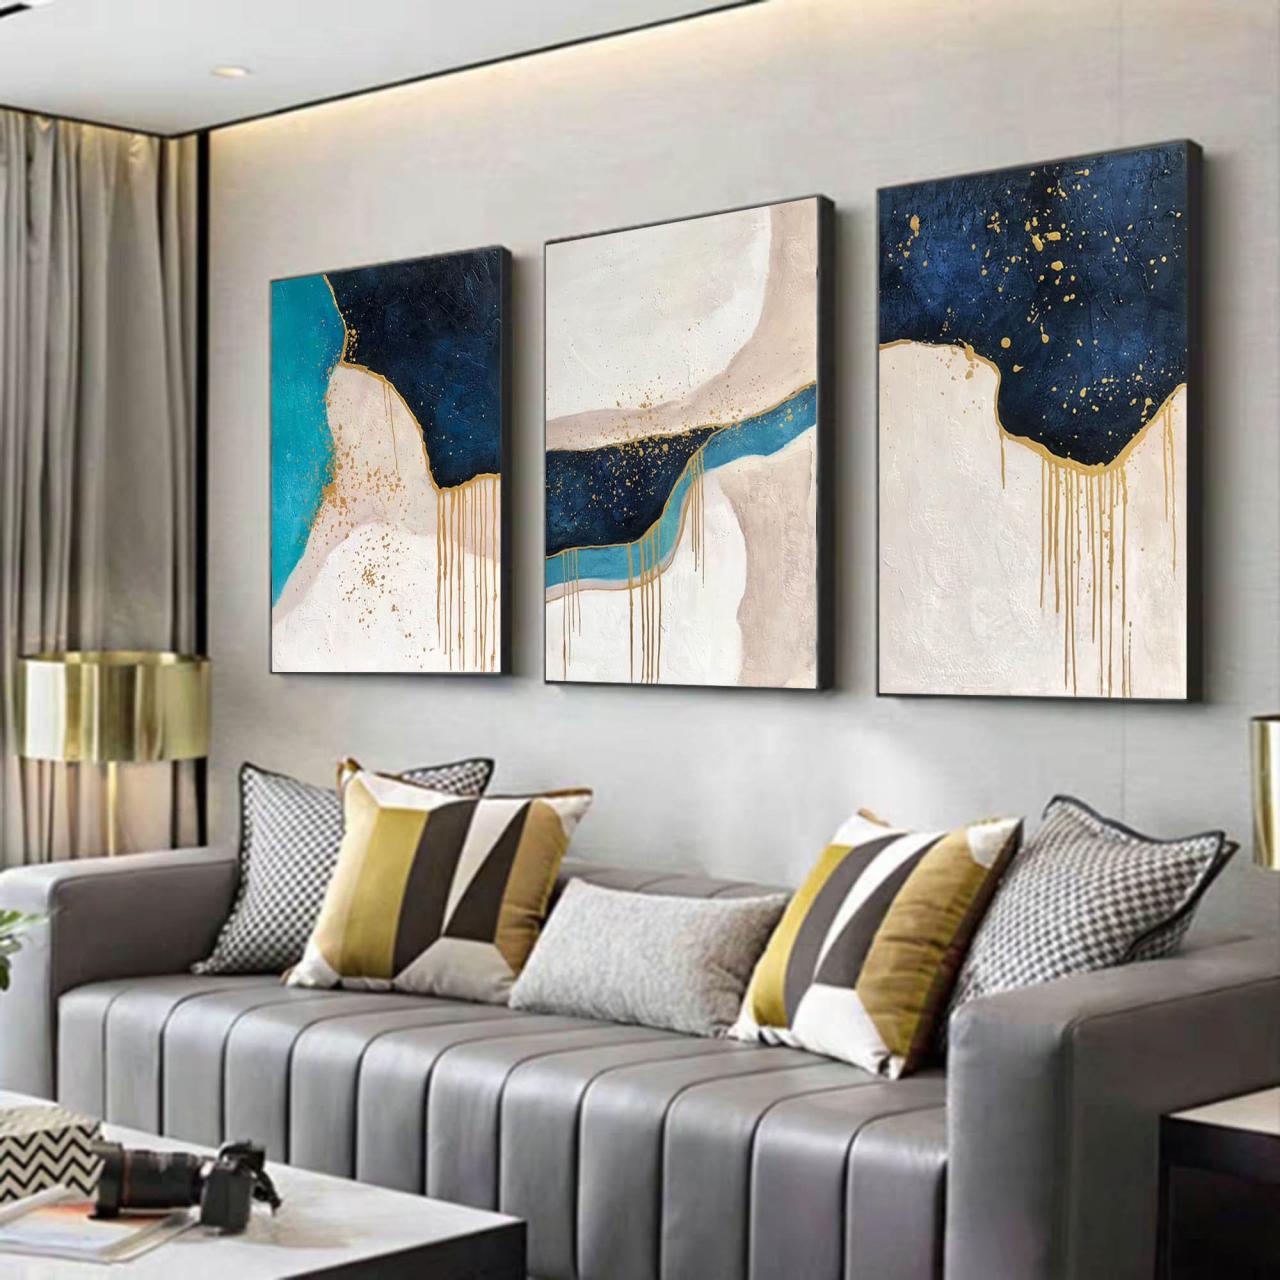 Wall canvas oversized piece overstock cheap room pieces set living decor wrapped painted modern paintings decoration hand cool house oliver